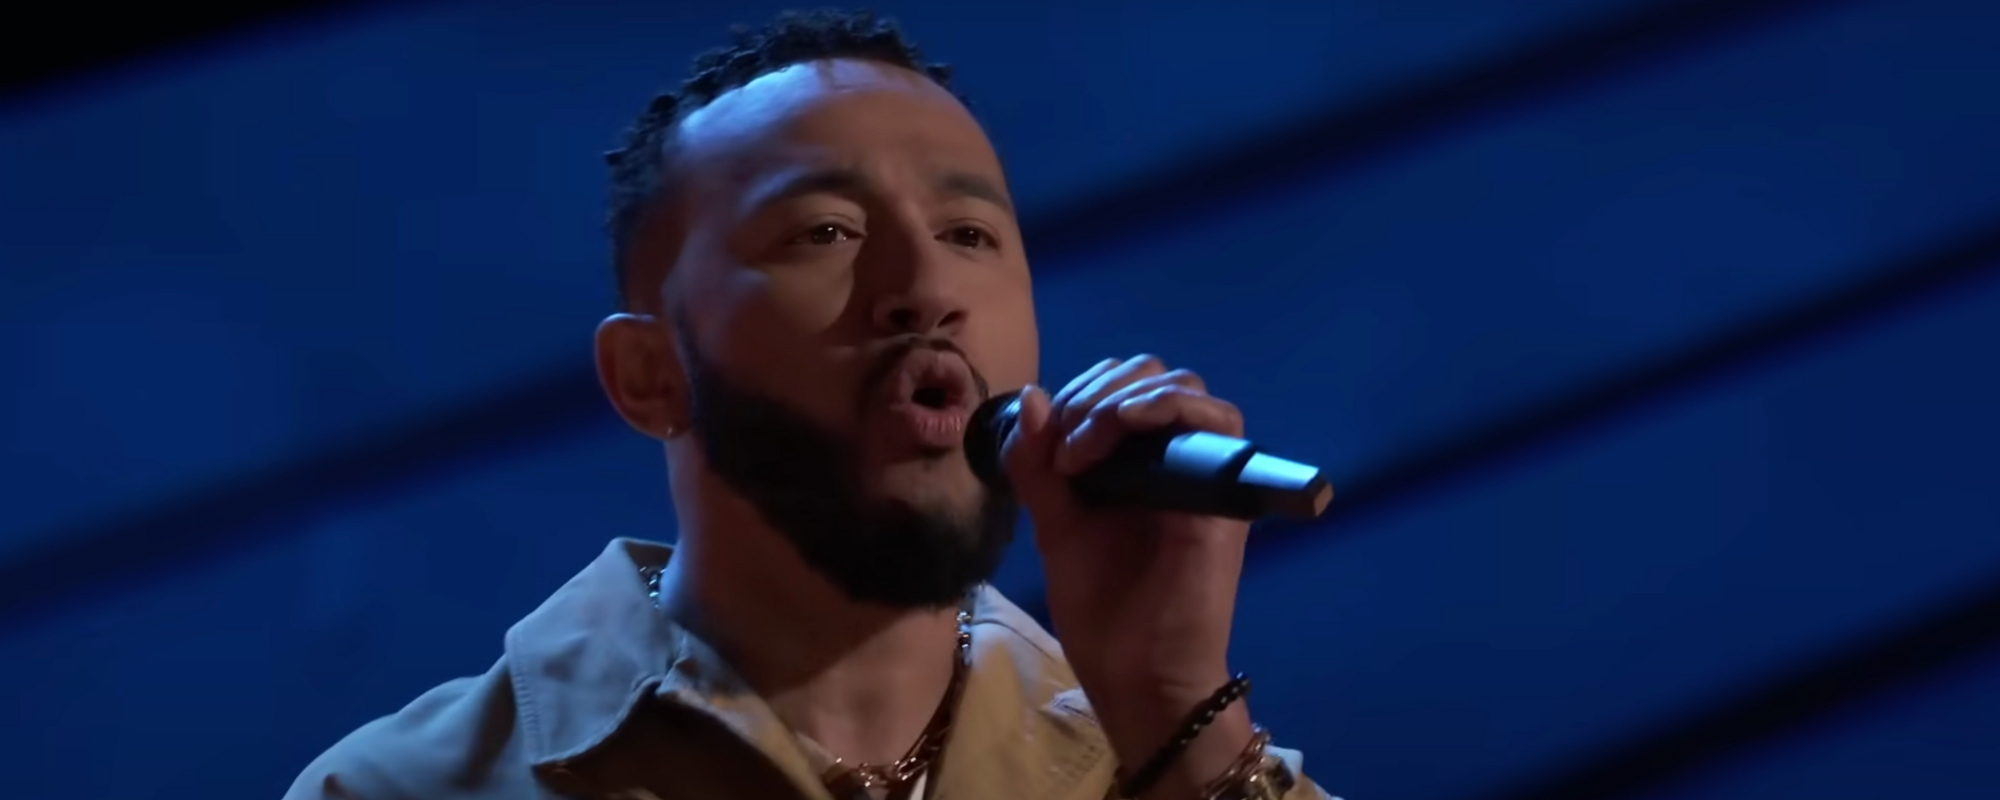 John Legend Lookalike Talakai Takes on Sam Smith’s “Stay with Me,” Stuns Judges on ‘The Voice’